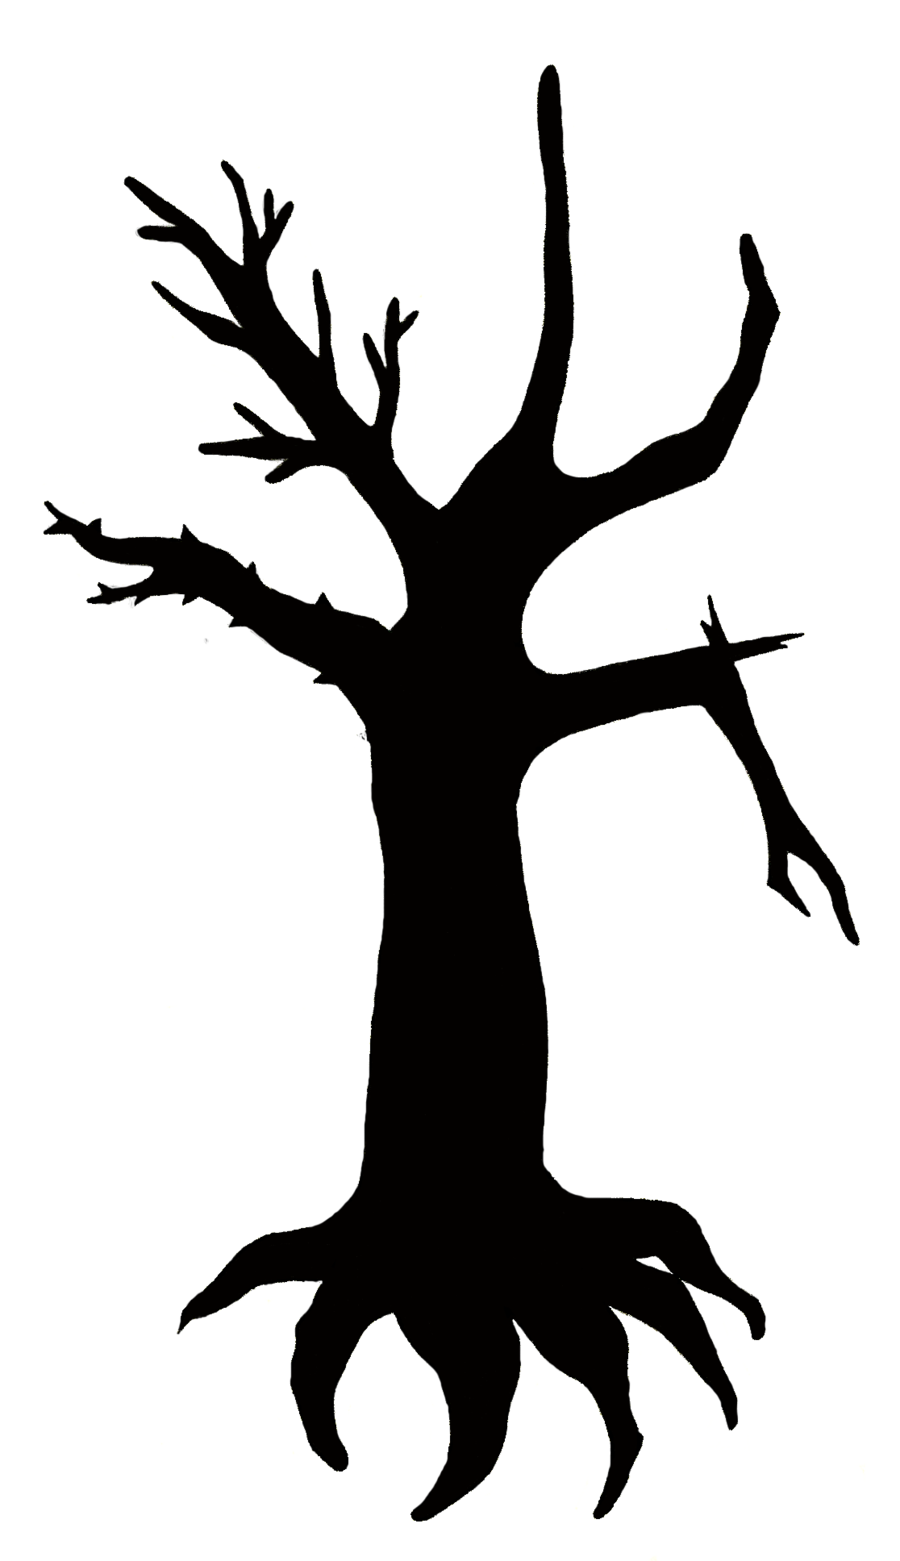 Outline Of Tree With Branches - ClipArt Best